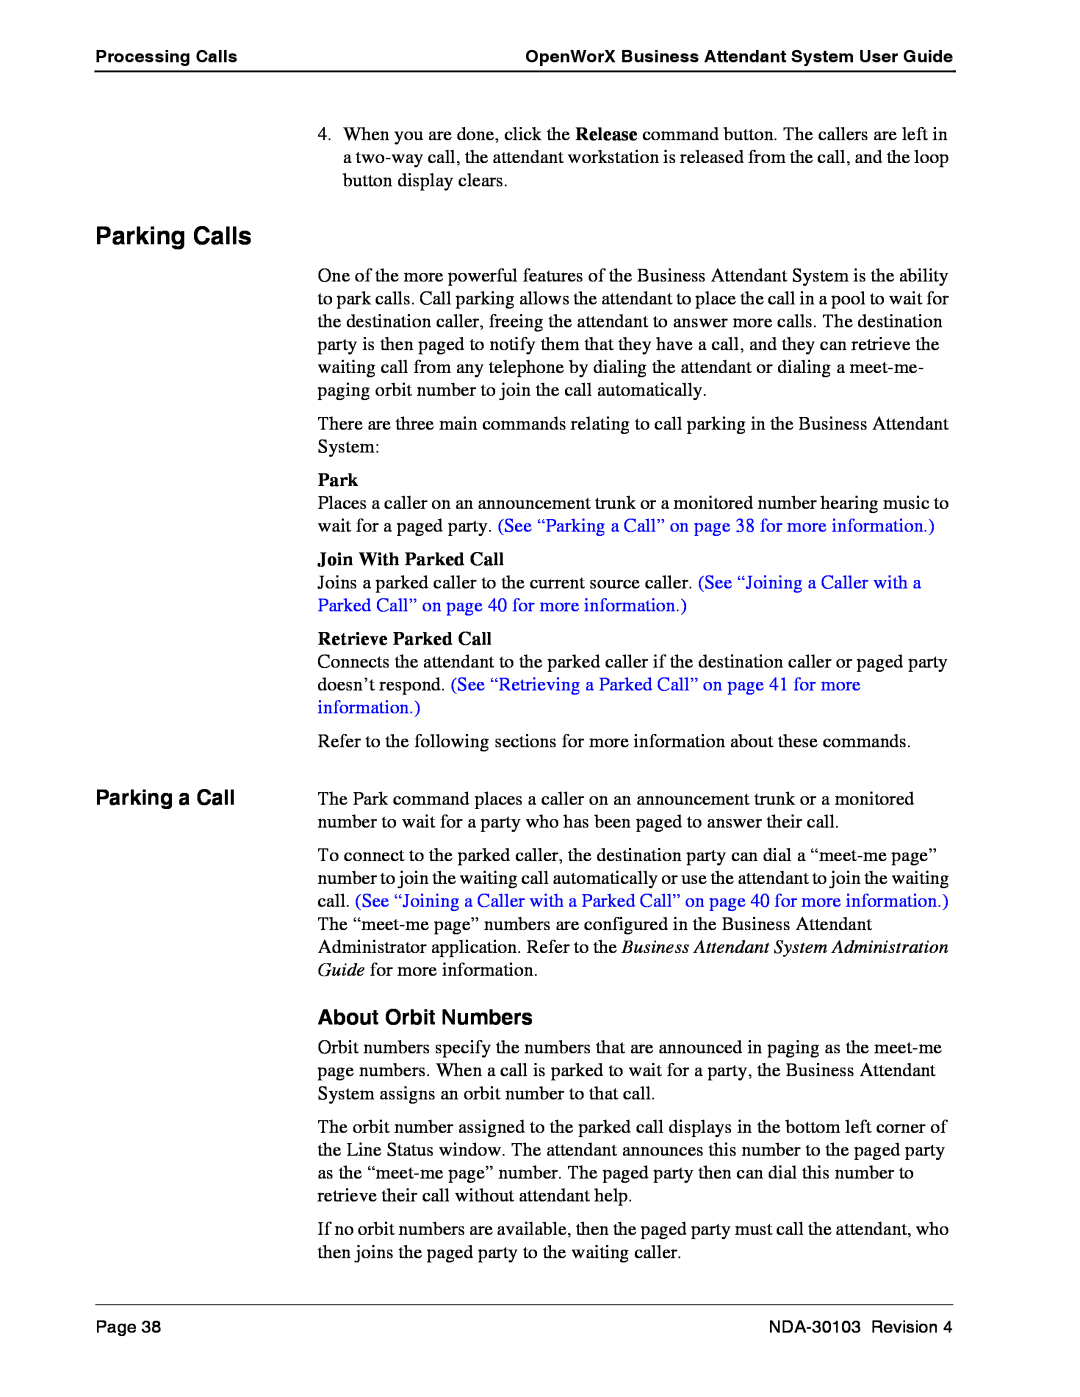 NEC NDA-30103-004 manual Parking Calls, Parking a Call, About Orbit Numbers, Parked Call” on page 40 for more information 